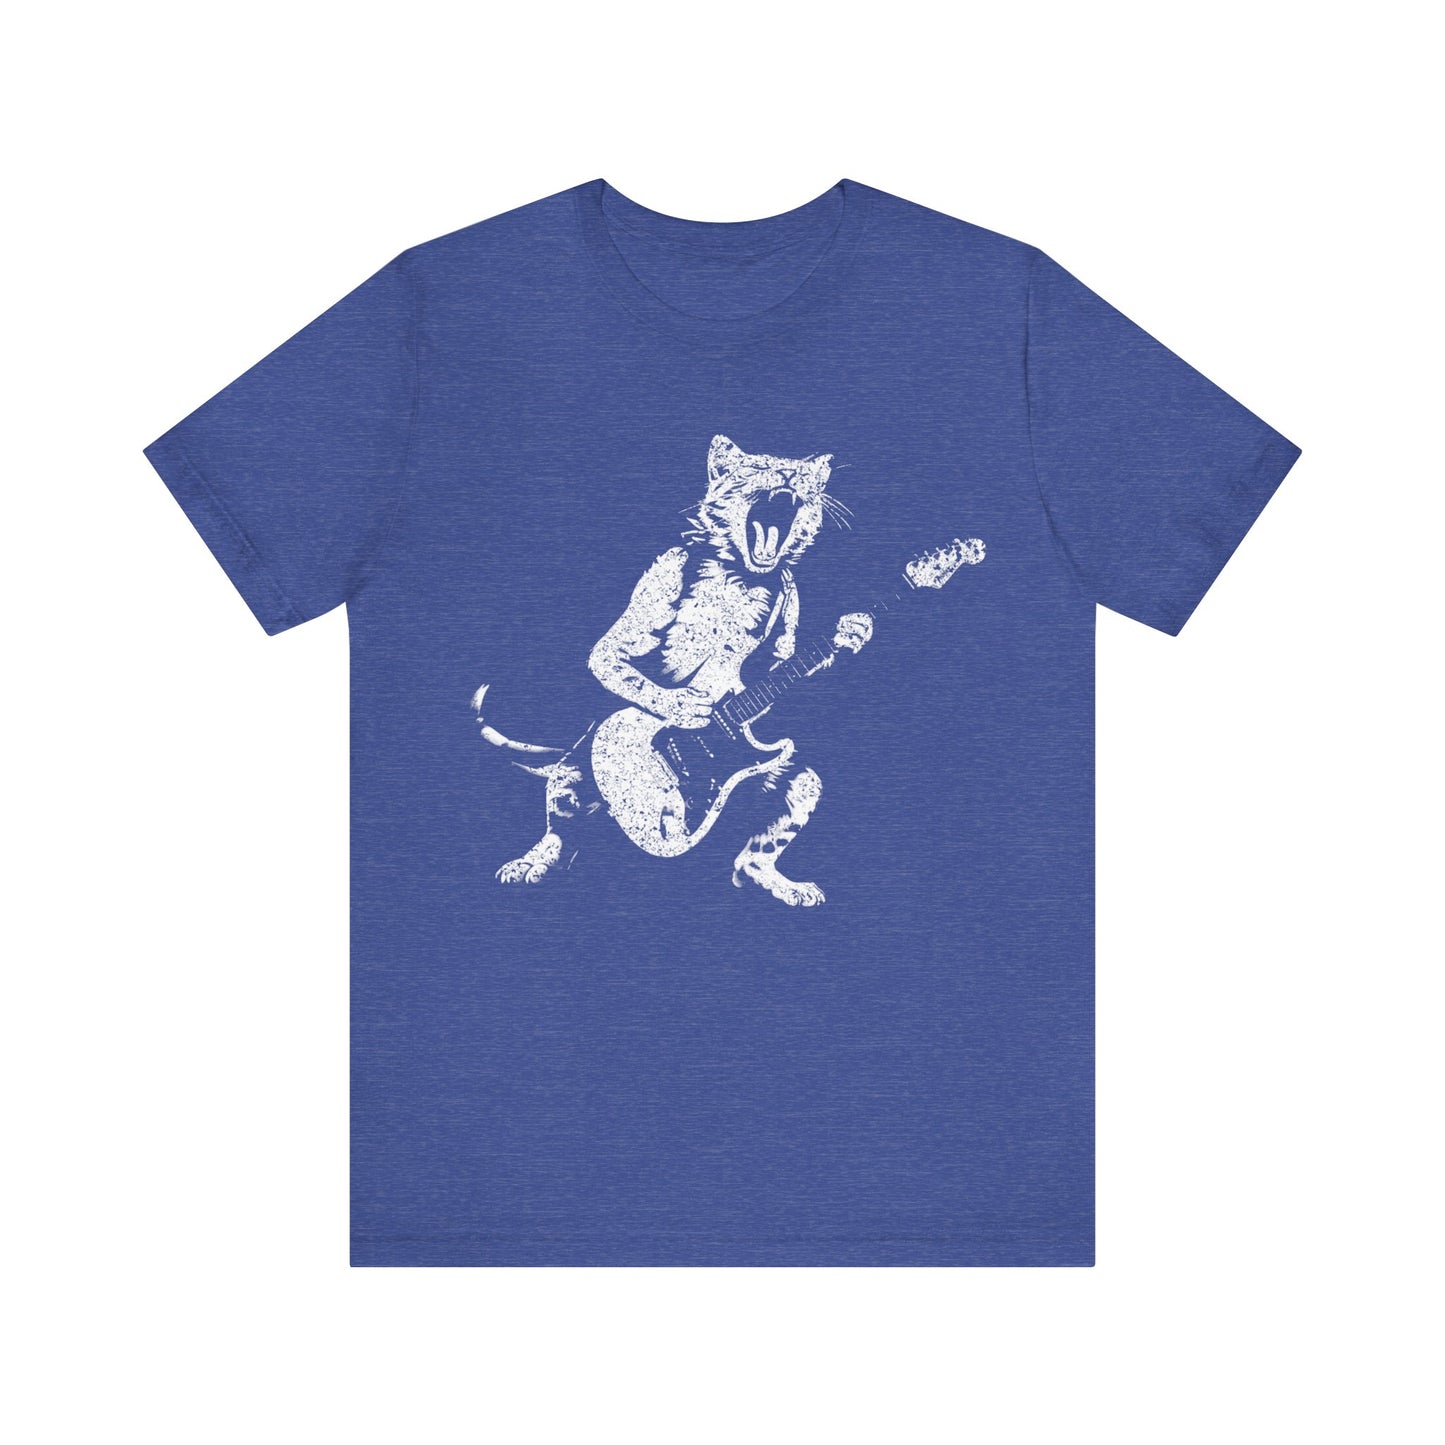 Rockin' Kitty Cat T-shirt, Funny Gift for Cat Lovers and Guitar players, Gift for Rock Fans and Musicians, Bella+Canvas 3001 Tee